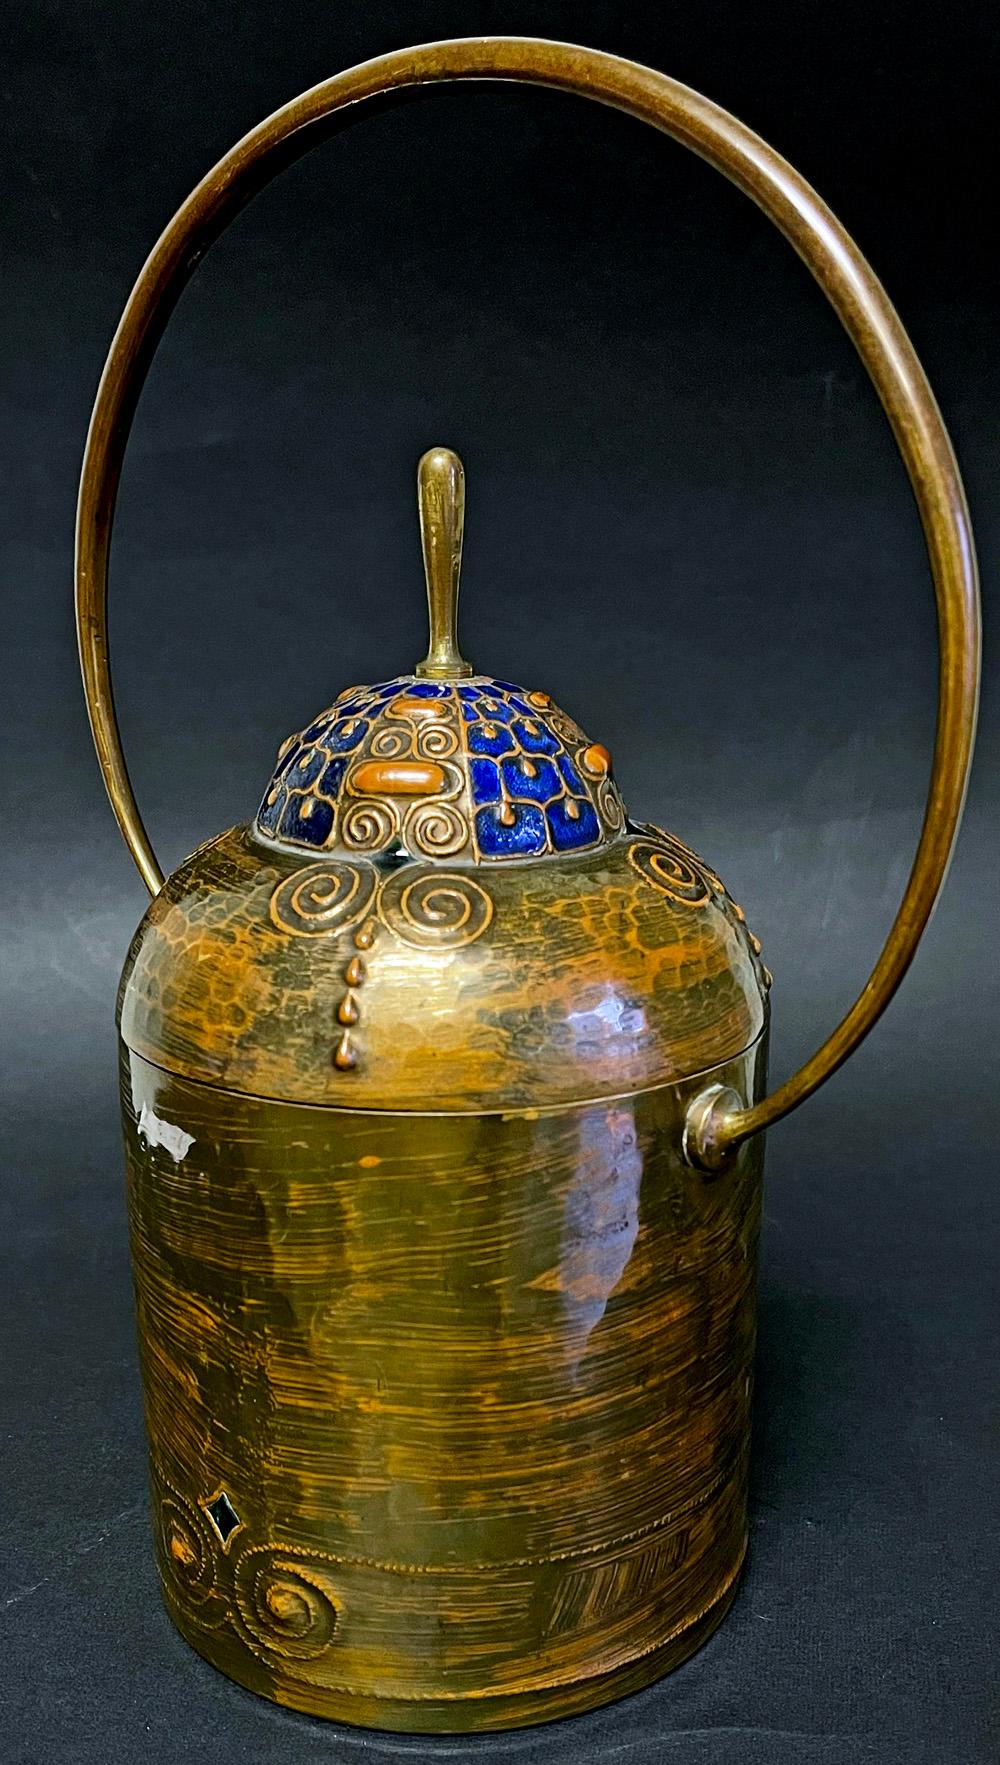 Crafted by Ludwig Vierthaler for the Josef Winhart metalwork company in Munich, this gorgeous and singular lidded canister displays the bravura repoussé work that the artist is known for. Winhart hammered elaborate Secession-style swirls and